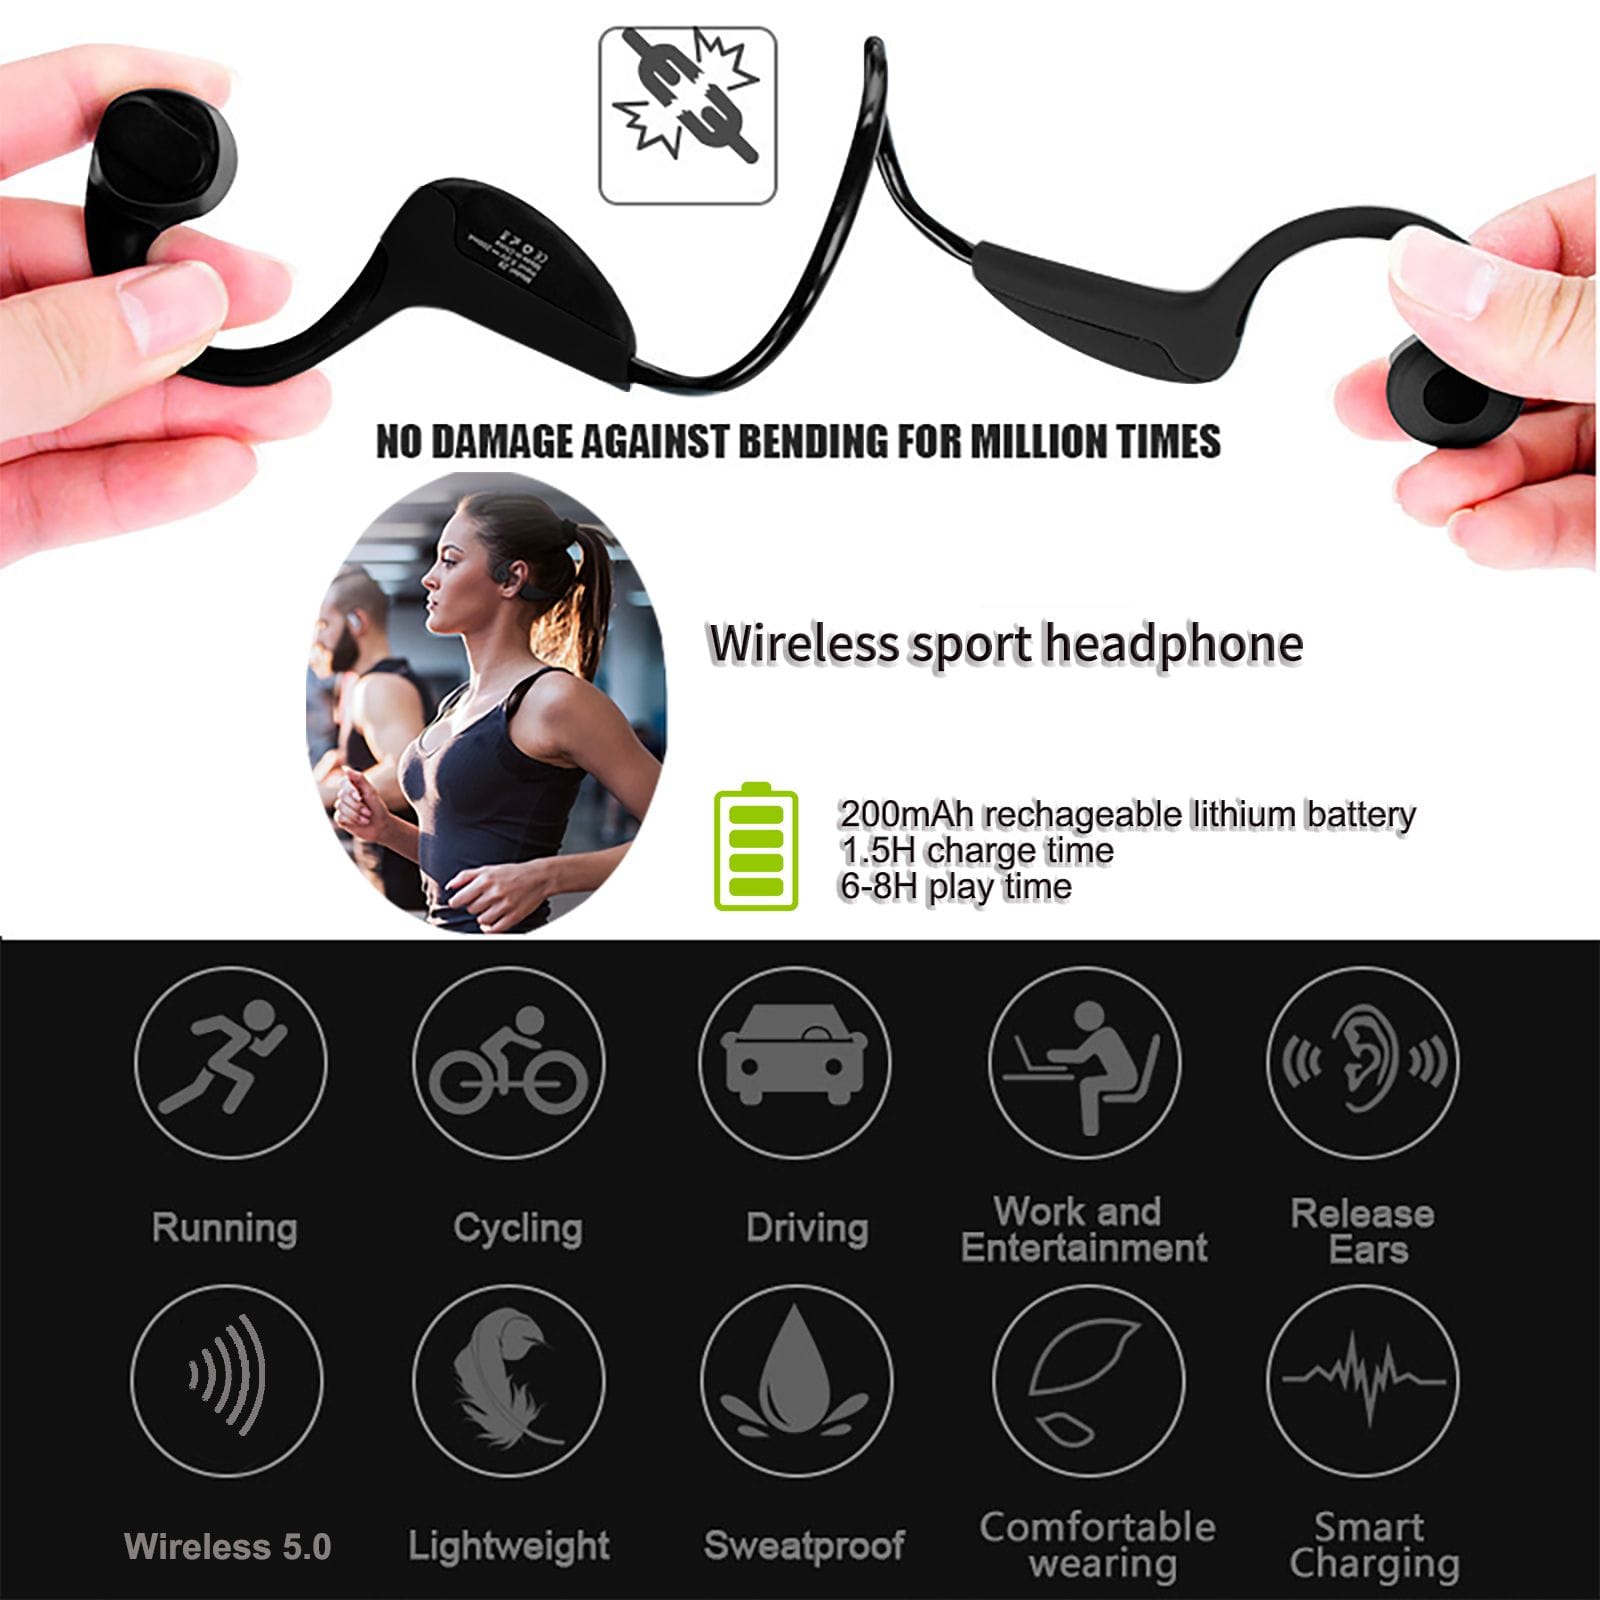 eEAR-BC-BT-Tx eEAR Bone Conduction Hearing Aids with Sound Transmitter. YES, IT'S HEARING AIDS, 2 in ONE, Bone Conduction Bluetooth headphones, military grade technology, and Bone Conduction Hearing Aids.